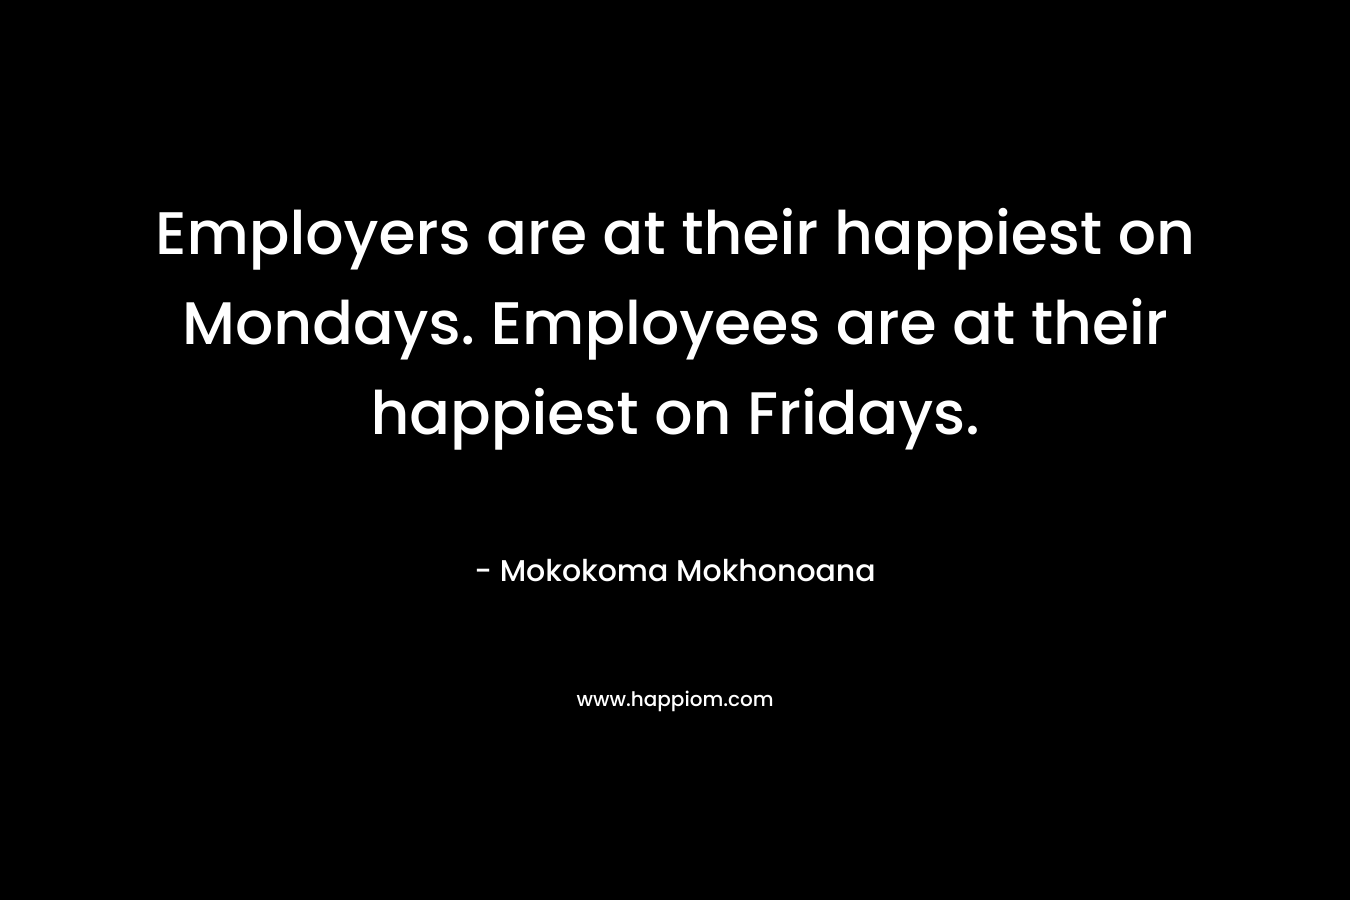 Employers are at their happiest on Mondays. Employees are at their happiest on Fridays. – Mokokoma Mokhonoana